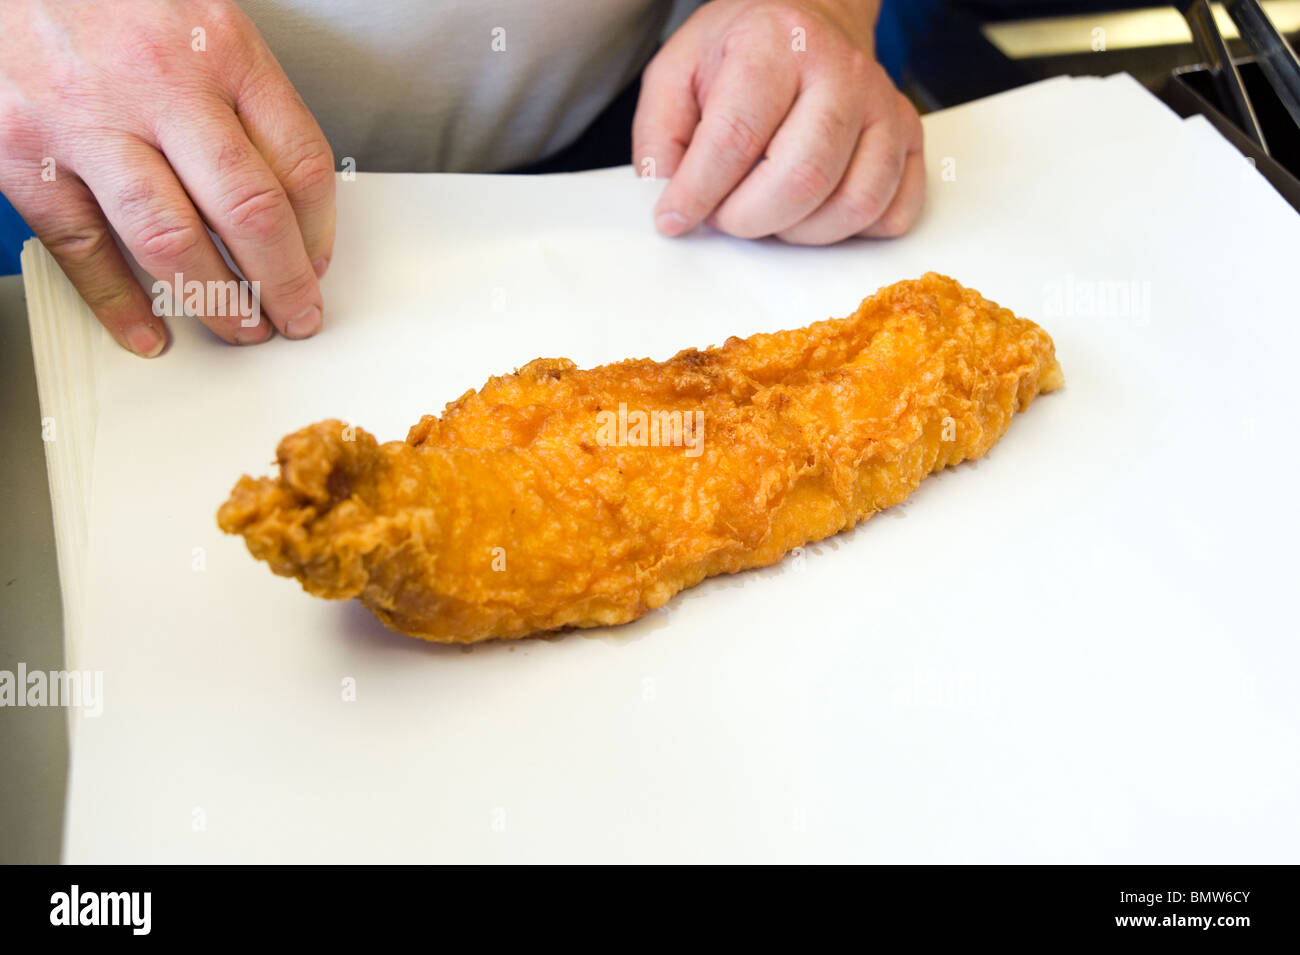 Portion of battered cod at fish and chip shop, England, UK Stock Photo